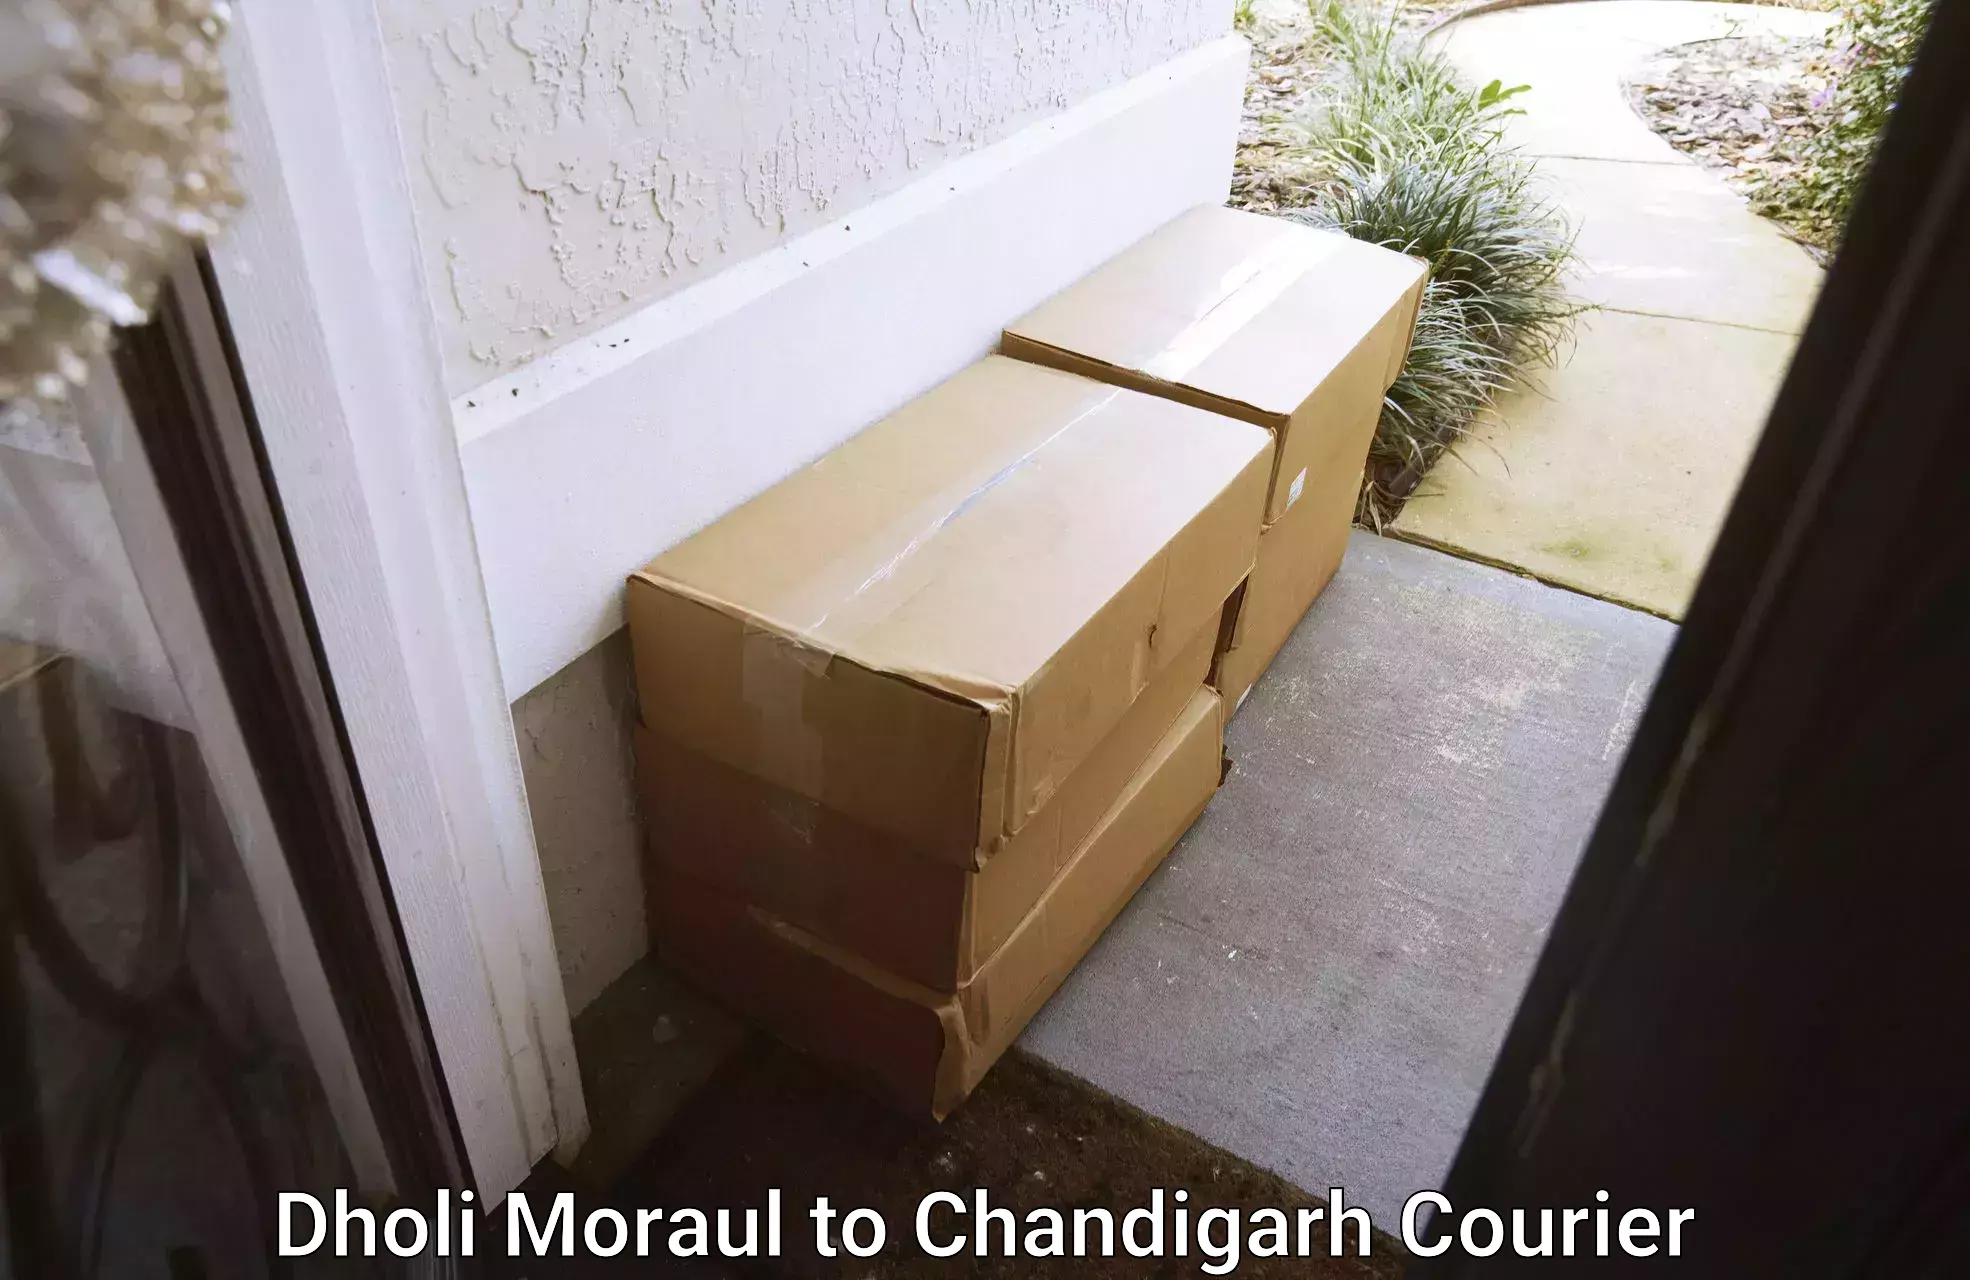 Trusted furniture movers Dholi Moraul to Chandigarh